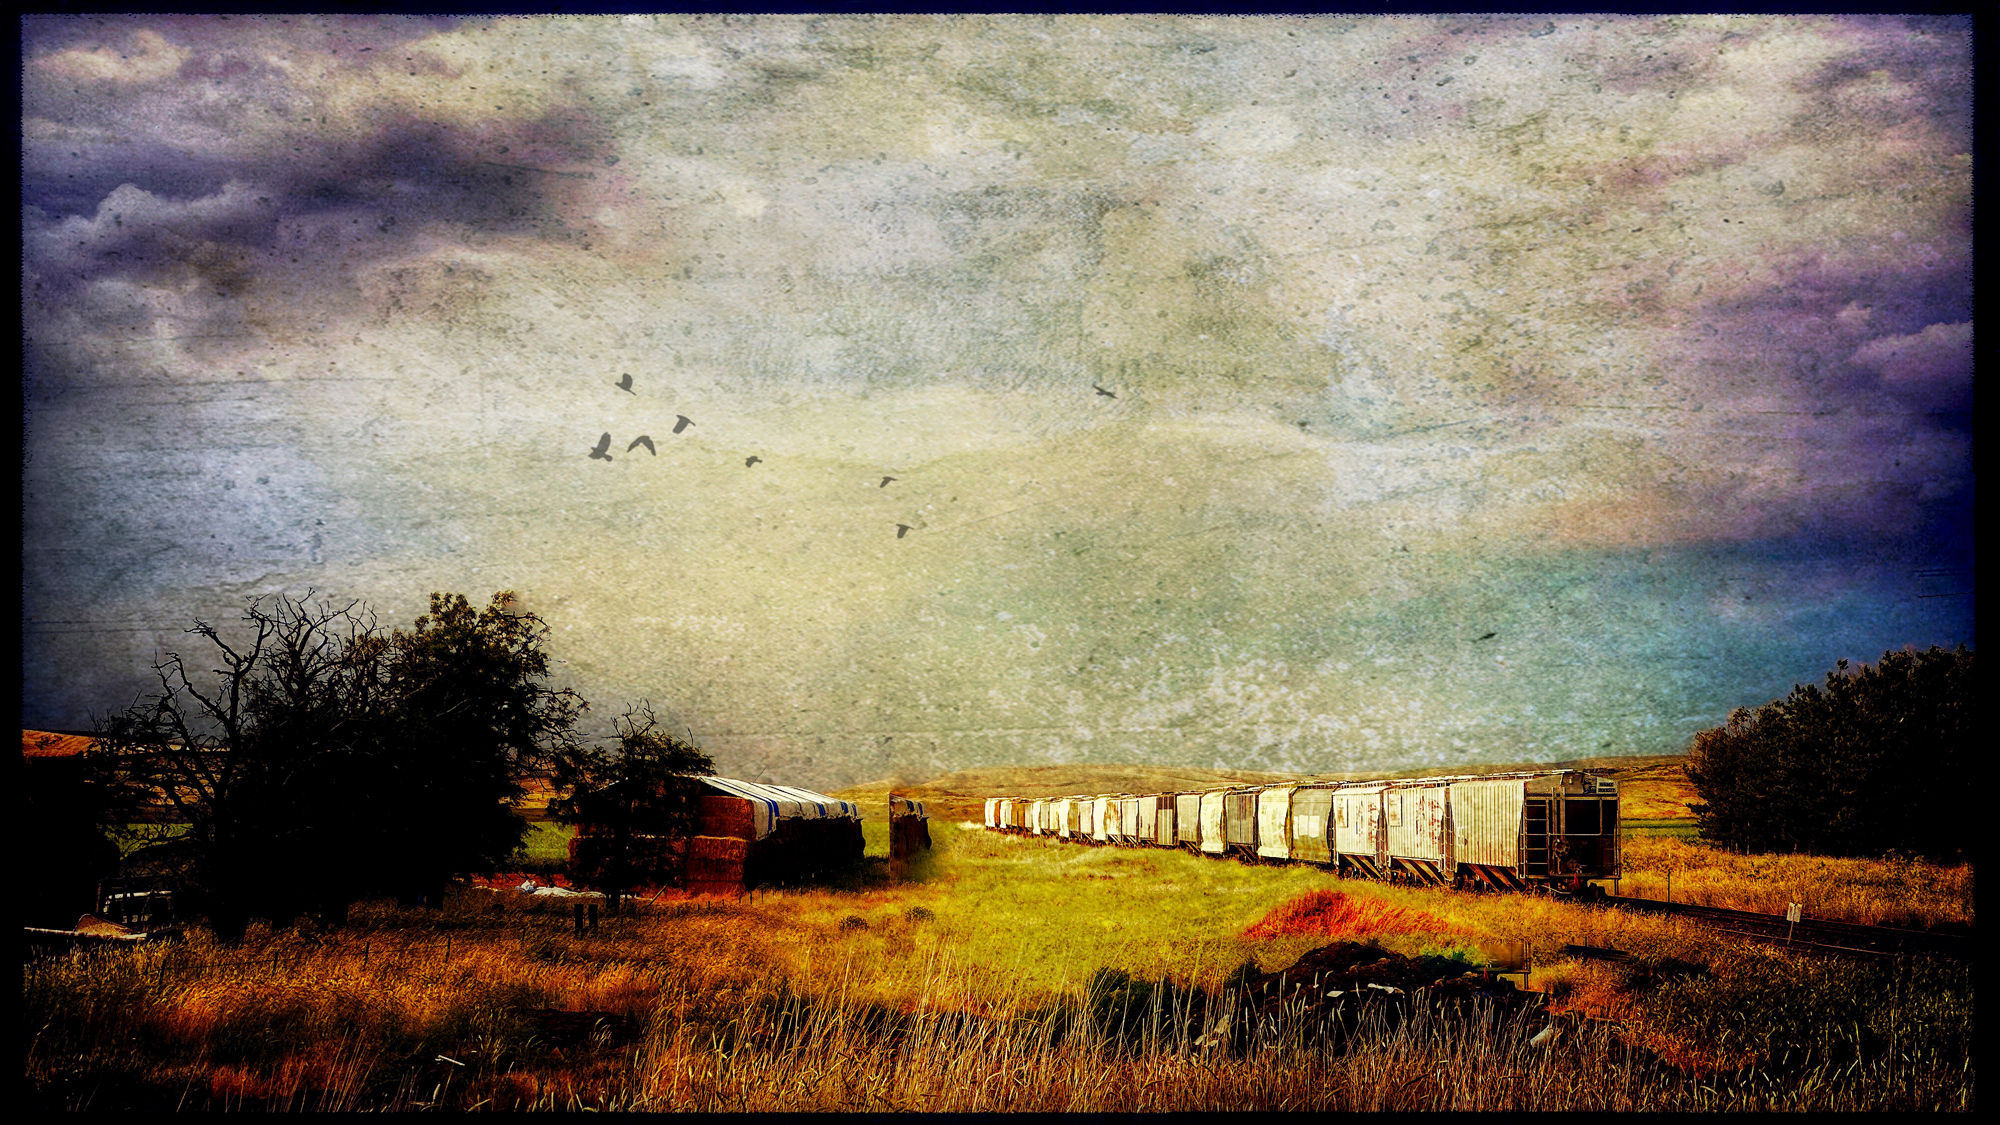 OK, I had a bit of fun with this image of railroad grain cars. I added a texture and the birds.